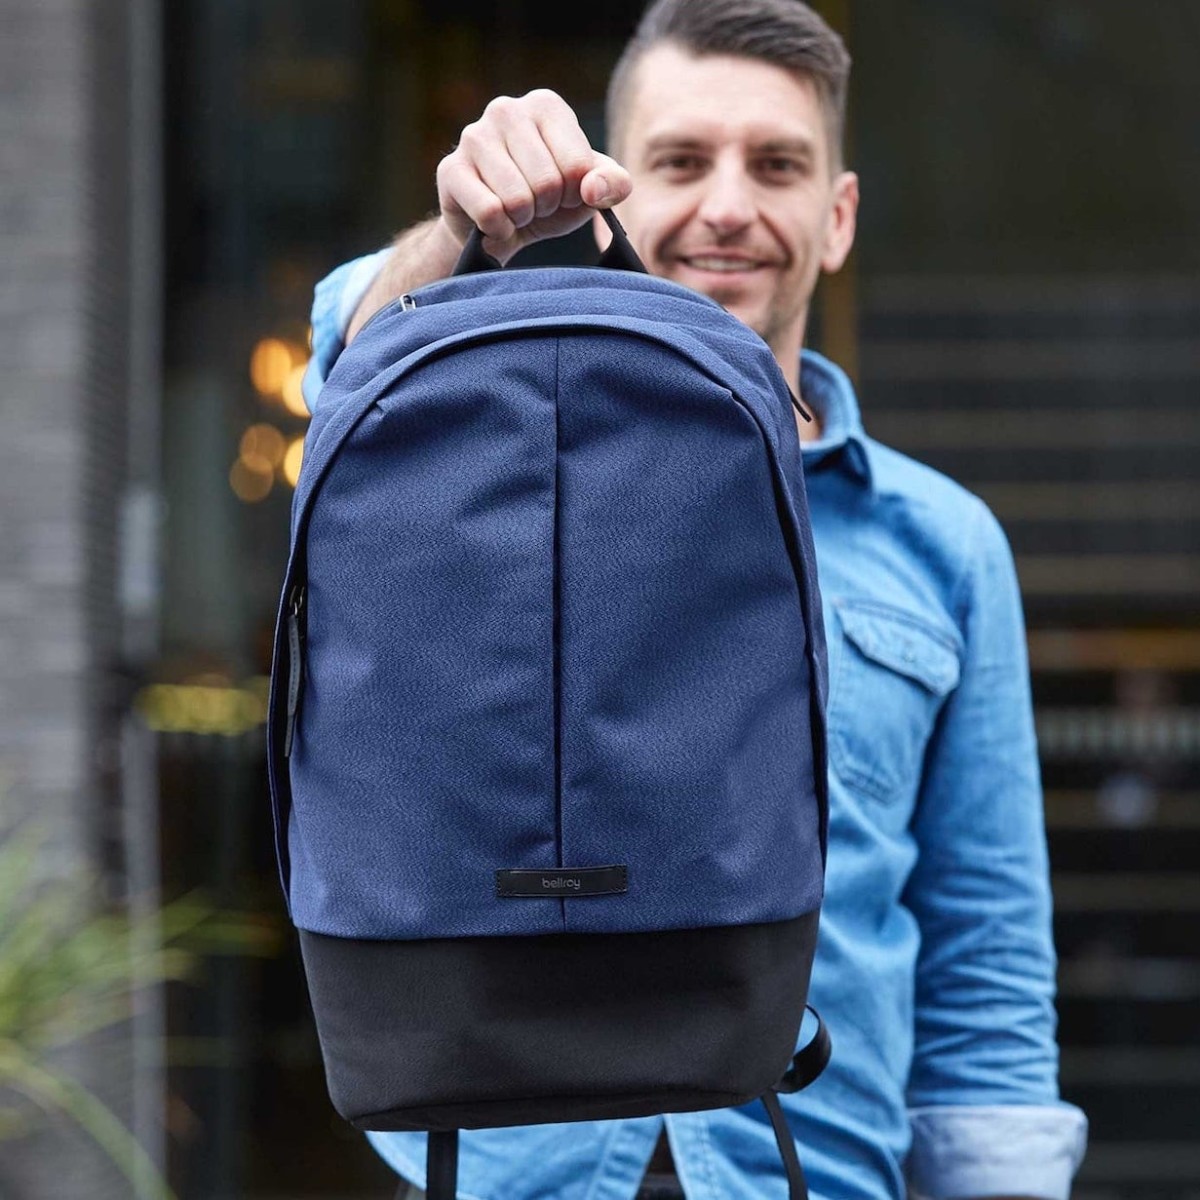 Bellroy Classic Backpack Plus Dual-Compartment Pack includes a waterproof laptop compartment